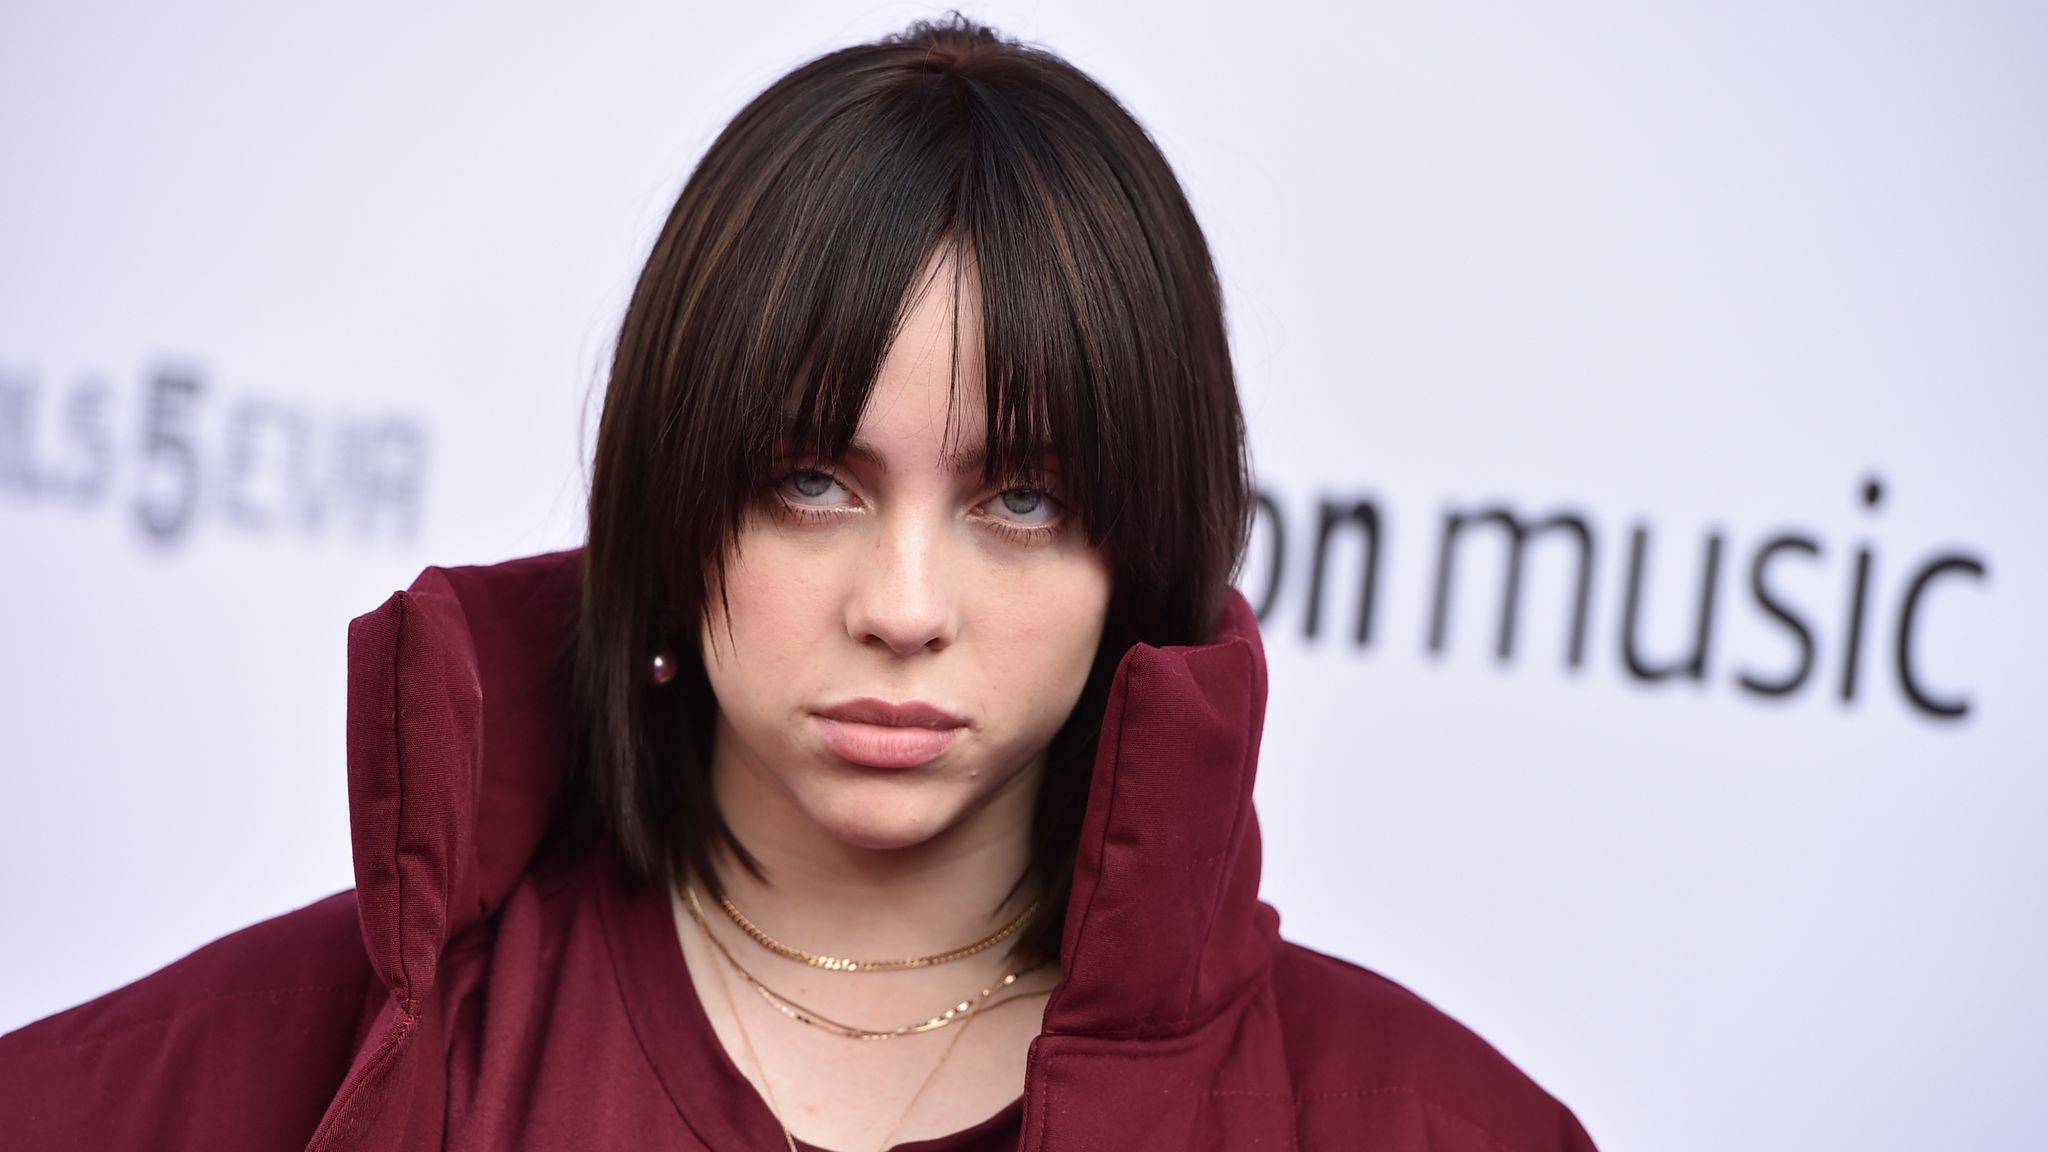 Tabbu Pron - Billie Eilish says watching porn from the age of 11 'destroyed my brain' |  Ents & Arts News | Sky News